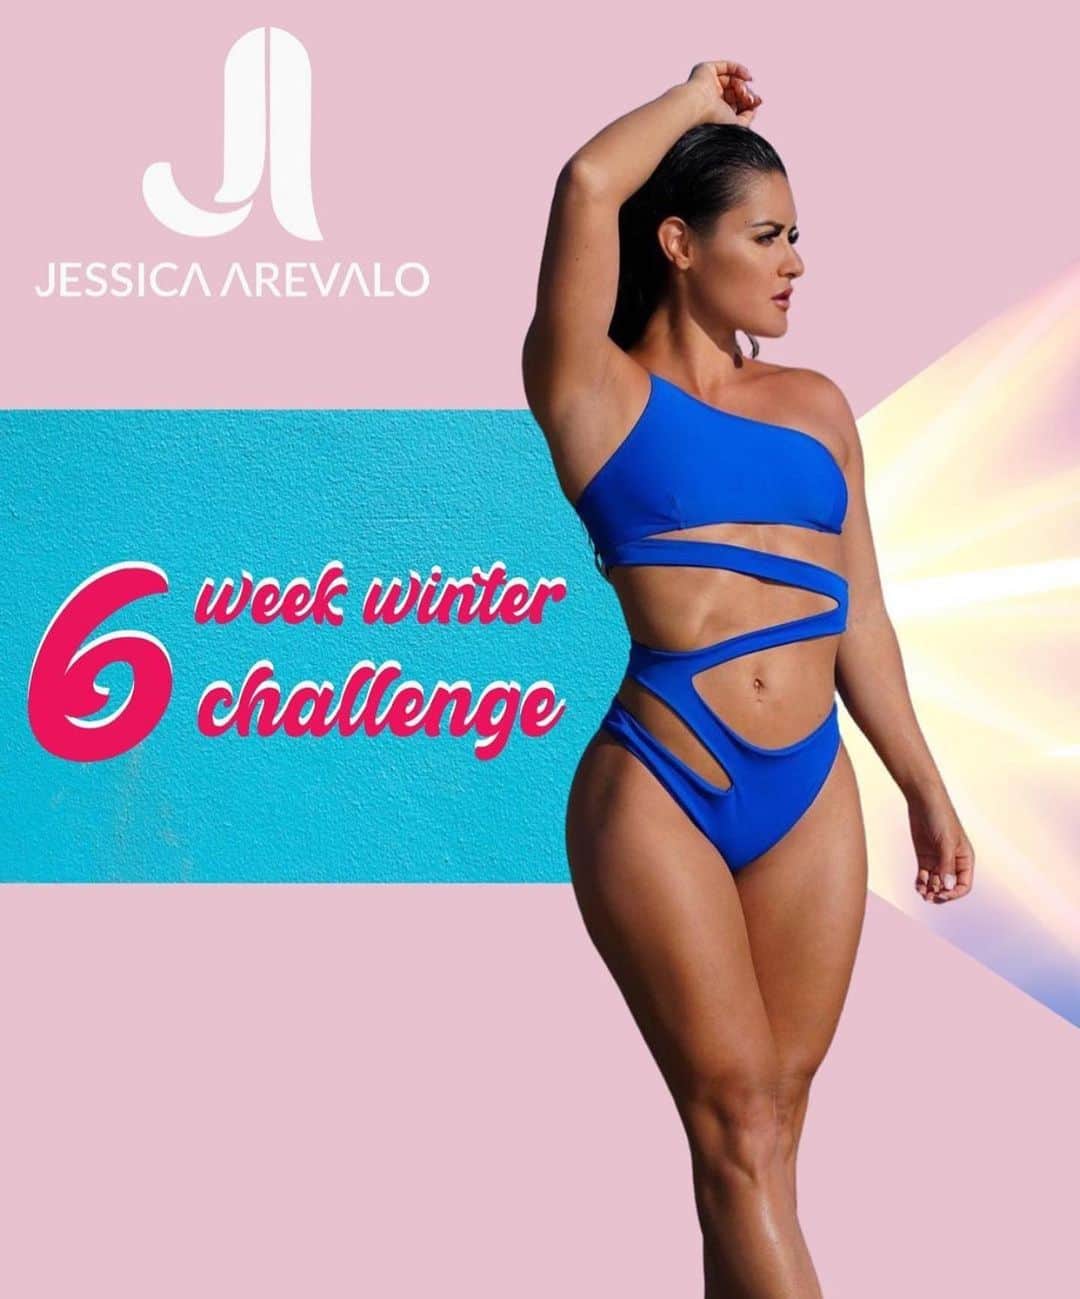 Jessica Arevaloのインスタグラム：「ONLY 5 DAYS LEFT TO SIGN UP! MY 6 WEEK WINTER CHALLENGE IS NOW LIVE!😍  💥IF YOU ARE LOOKING TO TONE UP, LOSE FAT OR LEARN MY WAYS THIS CHALLENGE IS FOR YOU!💥 - Open enrollment is through Dec 13 & the challenge starts Dec 14! DON’T WAIT!🙌🏼 - 🔺My 6 Week Winter is challenge is just $99!!!  🔺This program includes: - 🔺BOTH GYM/HOME WORKOUTS  - 🔺Over $6k in cash prizes - 🔺One on One Coaching with me - 🔺Weekly Check ins - 🔺Workout Program +Macros/Meal Plans + Cardio Regimen  - 🔺Private Facebook Group and more! - 🔺WORLDWIDE ENTRY  - 🔺 FOR WOMEN & MEN  - CHECK OUT LINK IN BIO TO SIGN UP!👆🏼If you have any question please feel free to DM me directly!📩」